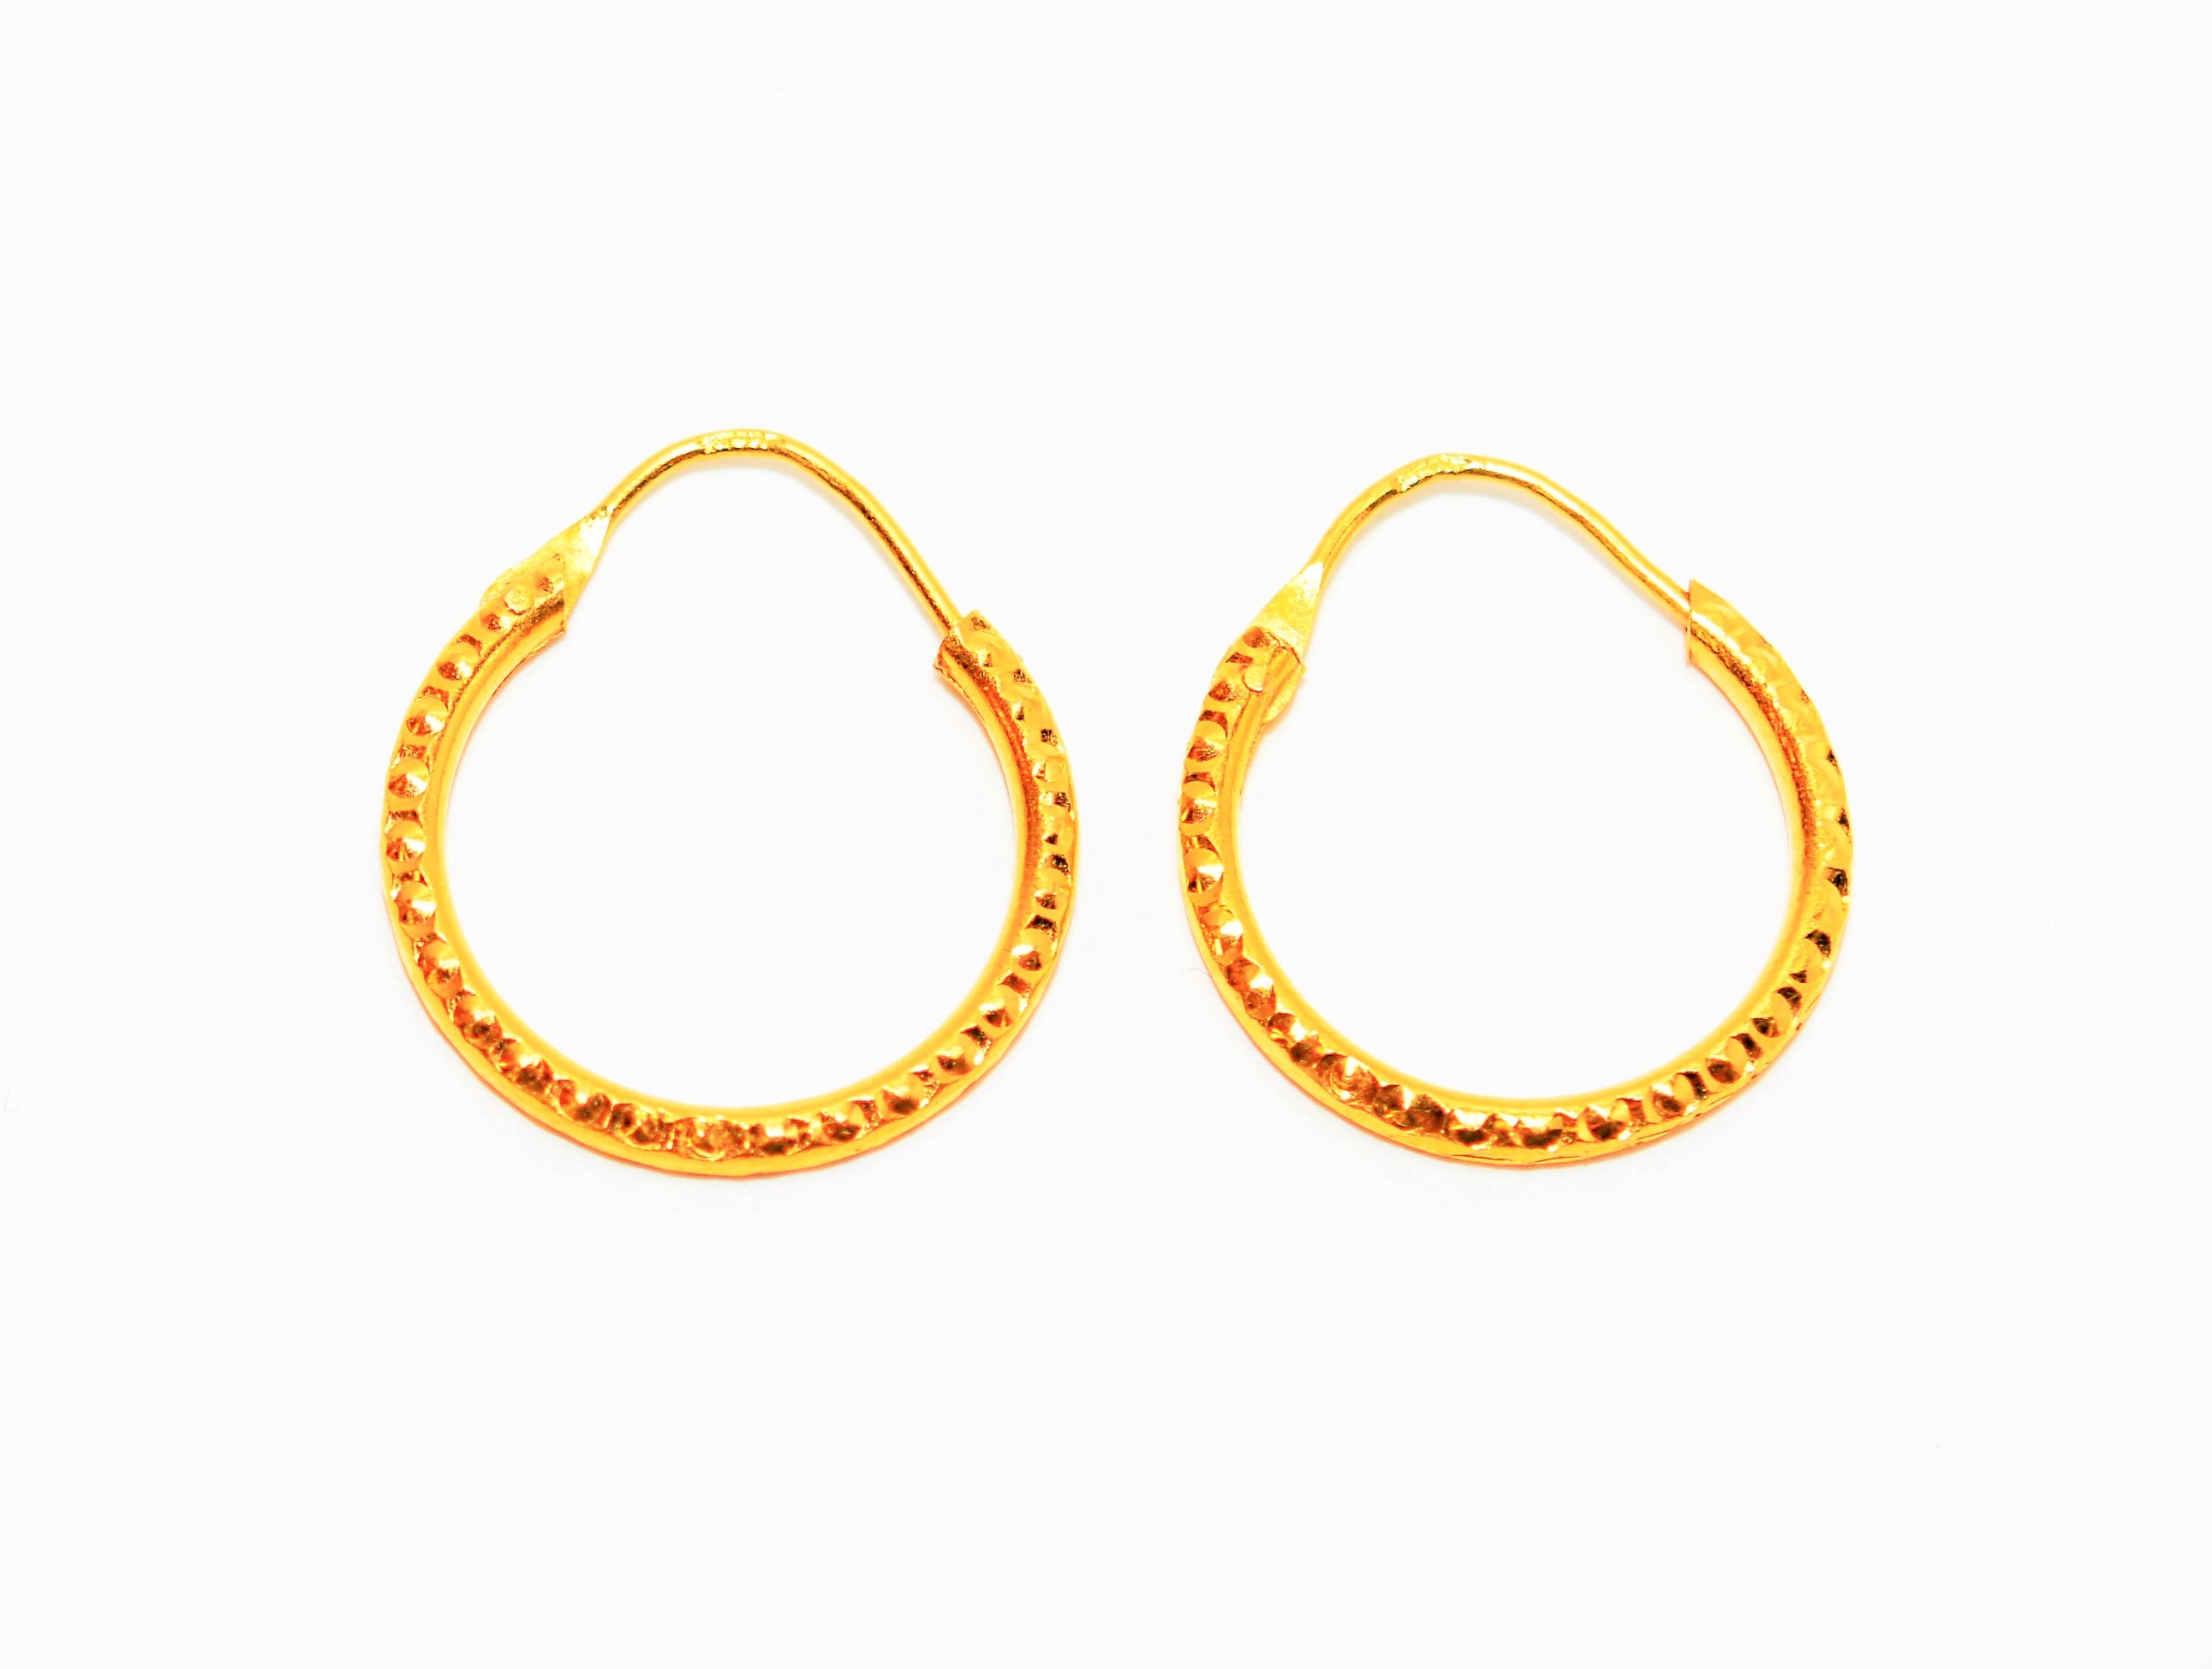 22 kt Gold Baby Earrings - ErHp24065 - US$ 212 - 22 Kt Gold (Earrings)  uniquely designed with clip-on earrings for small babies. Meenakari colours  ad